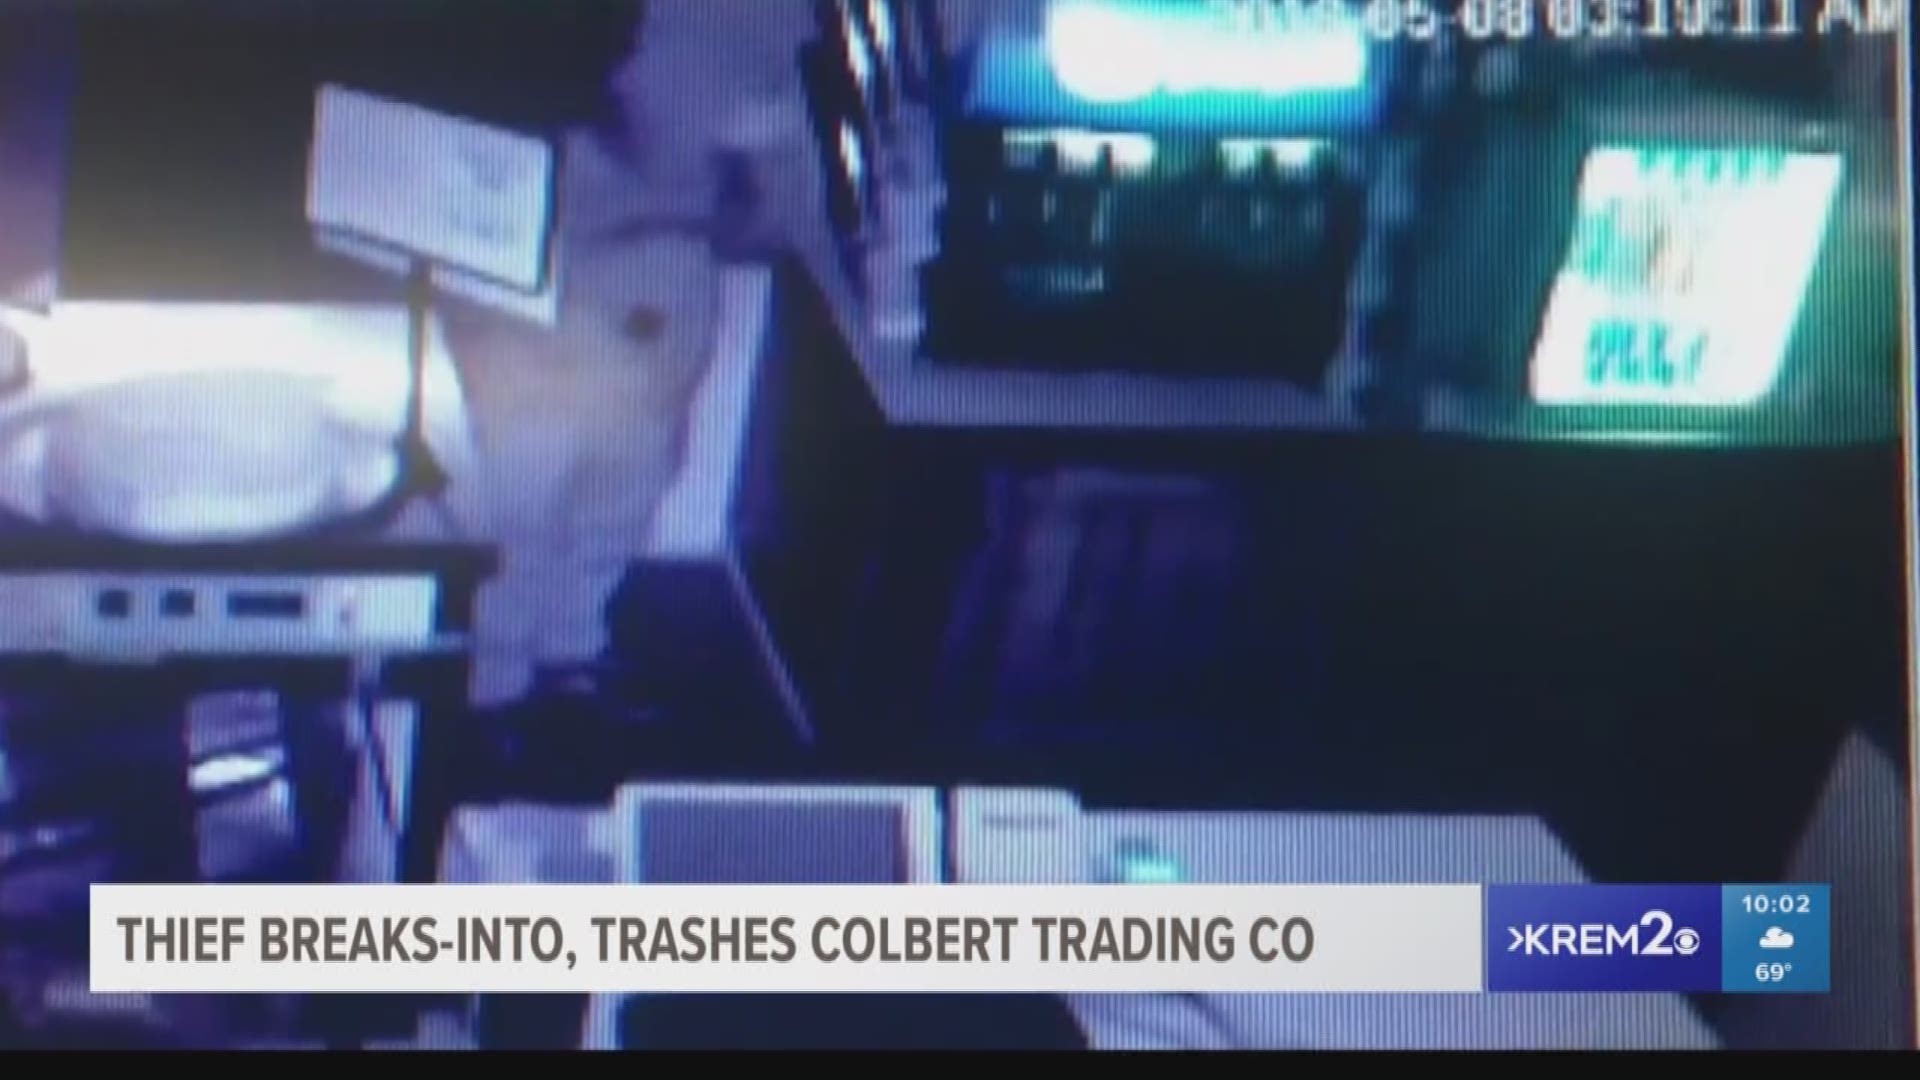 Crook hungry for nicotine breaks into historic Colbert store, steals safe with $100 inside